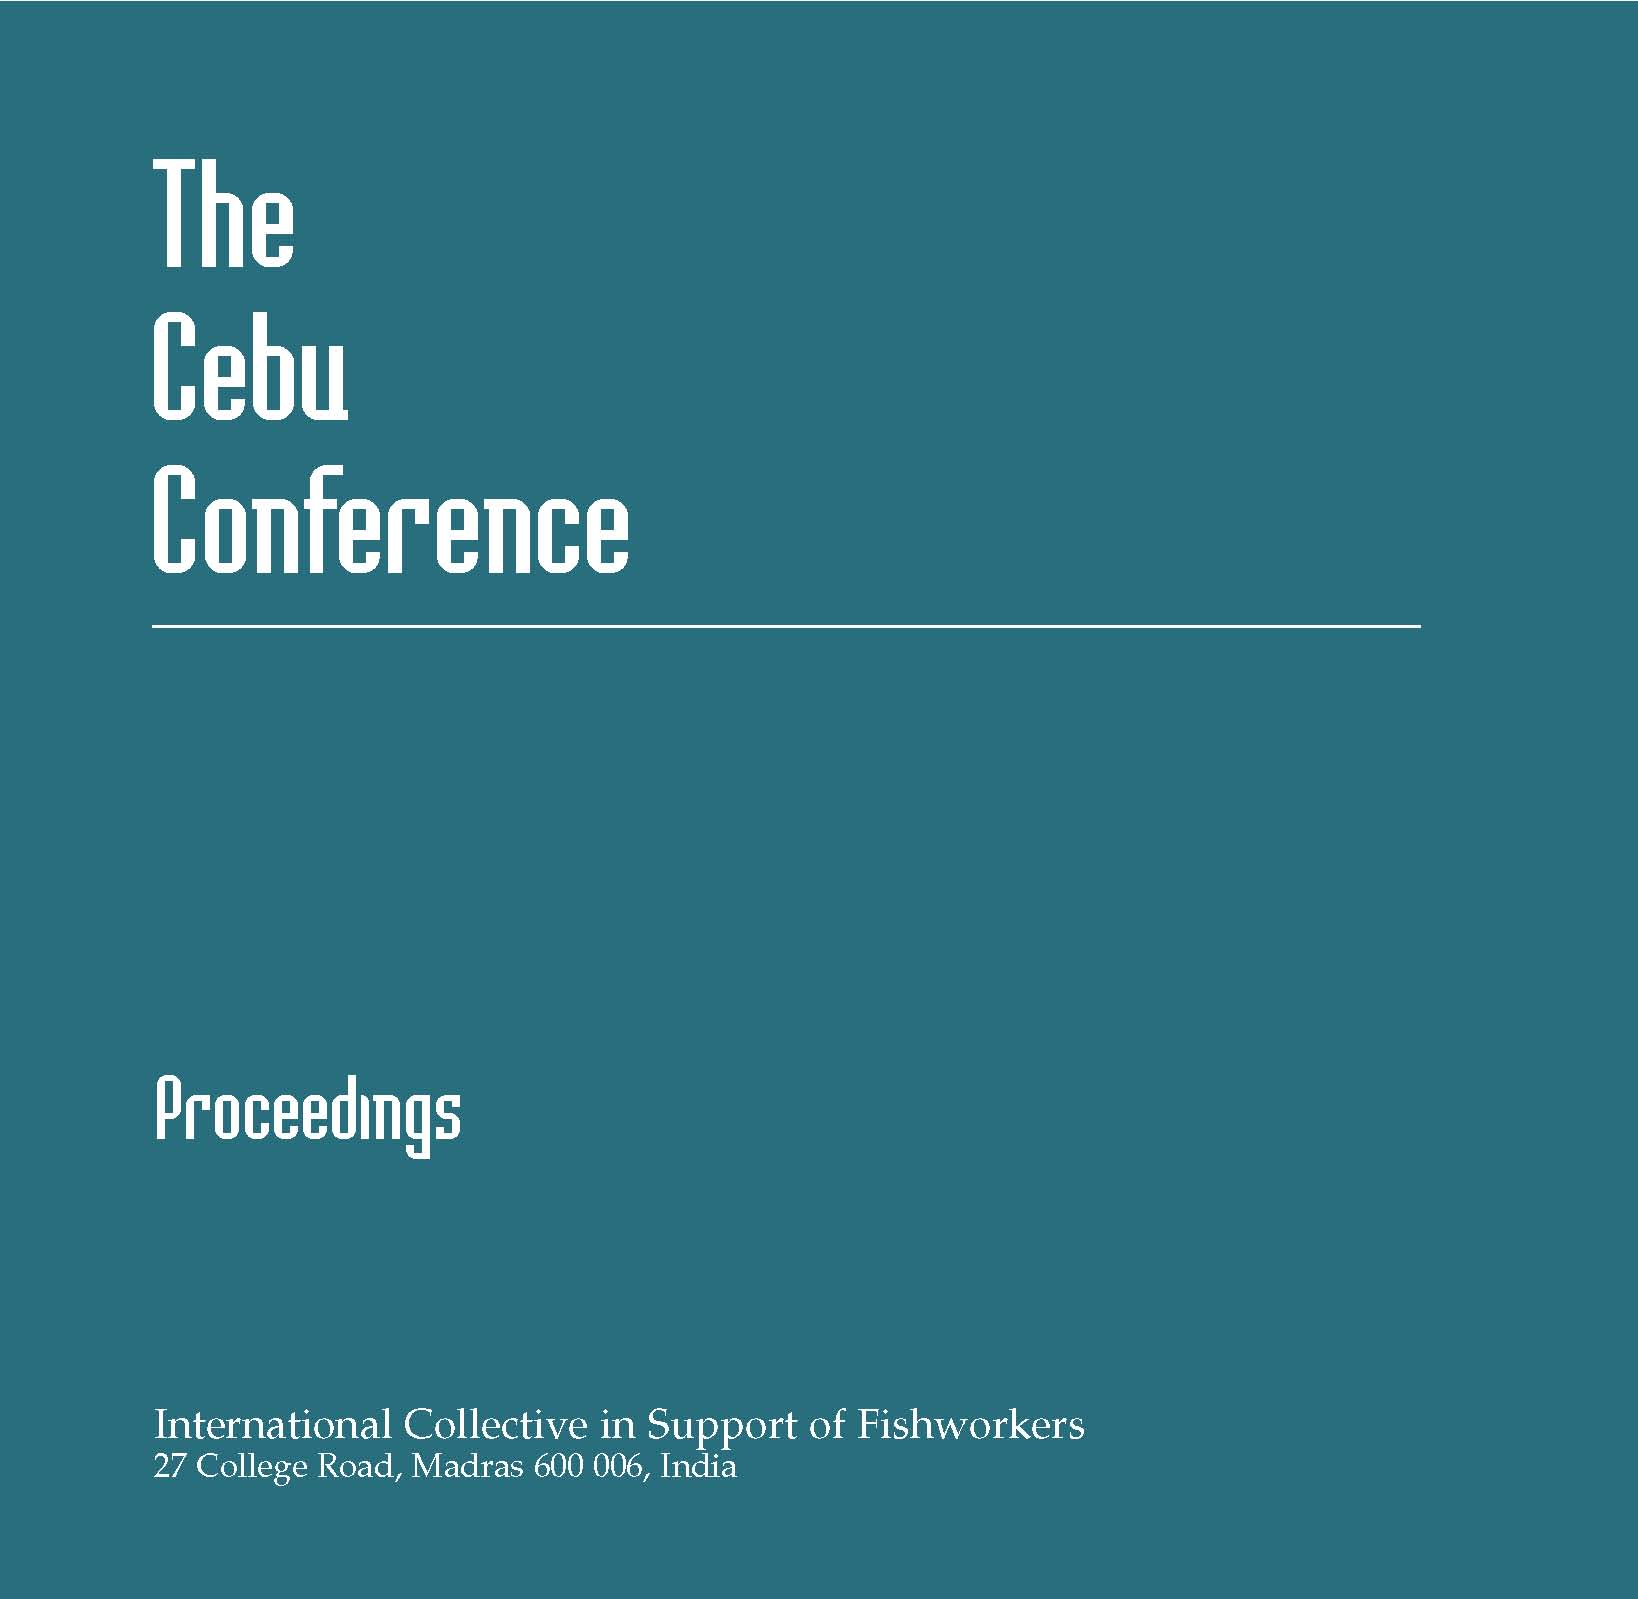 The Cebu Conference Proceedings: The Struggles of Fishworkers: New Concerns for Support, Cebu, Philippines, 2-7 June 1994